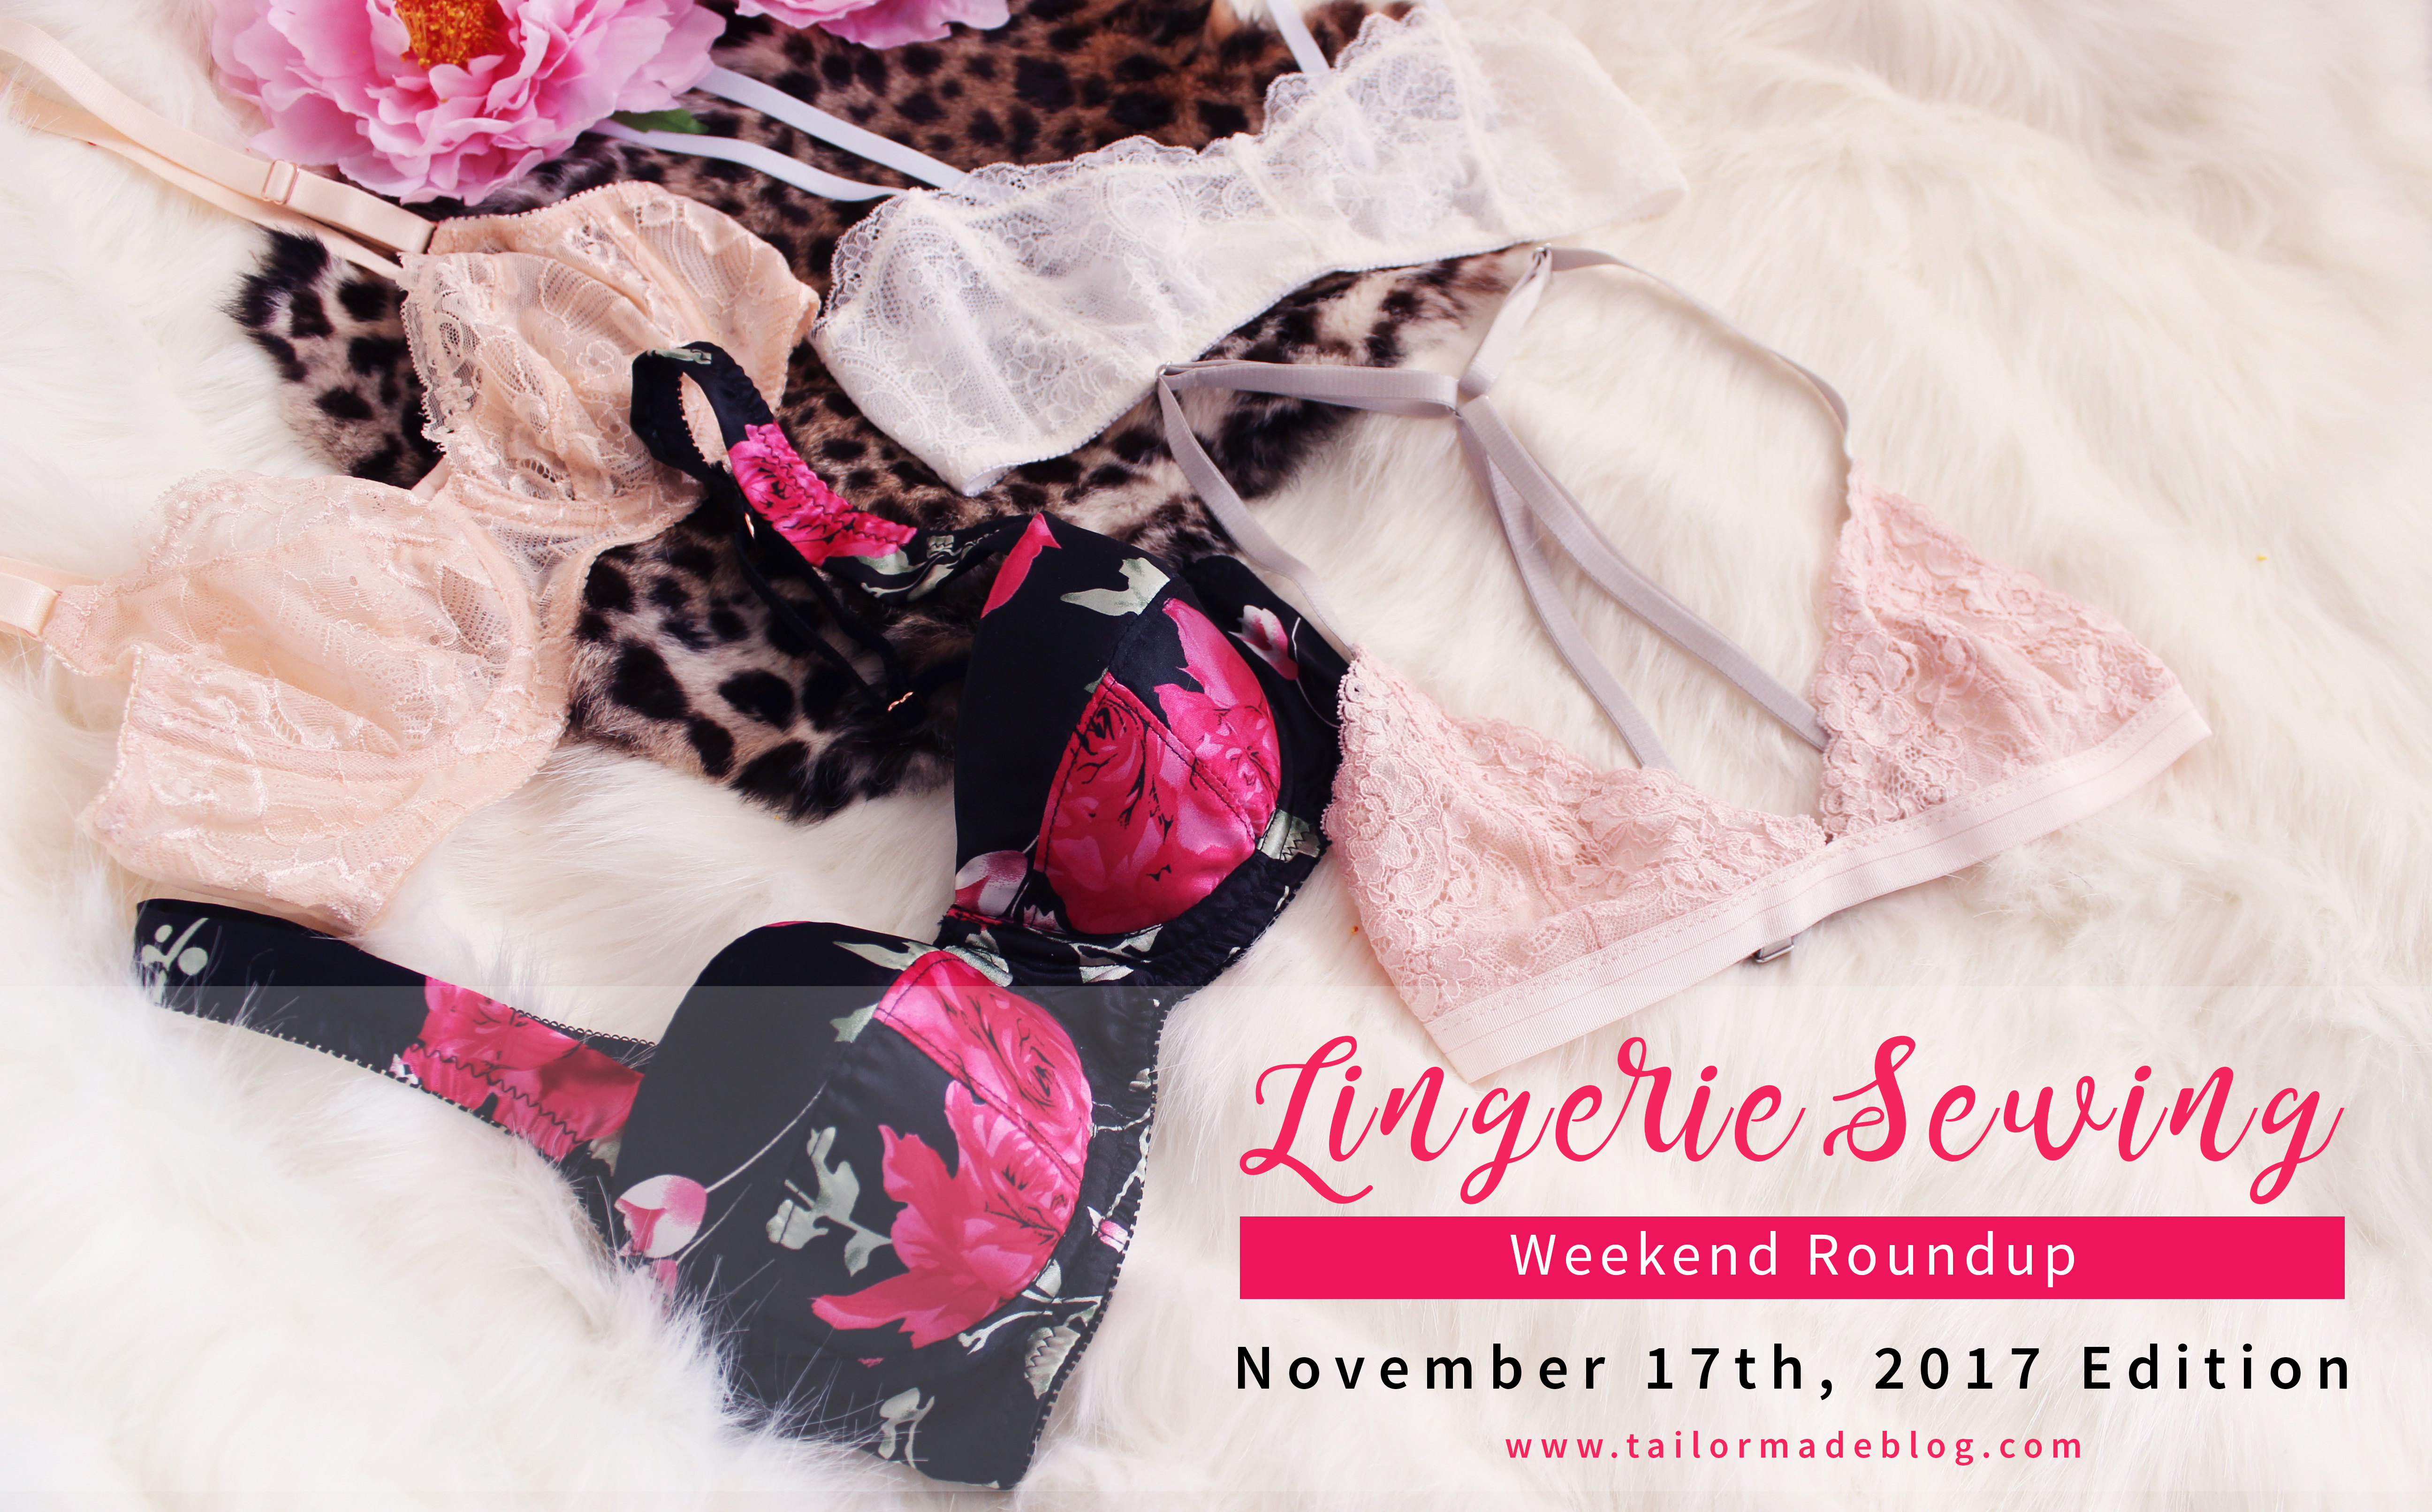 November 17th 2017 Lingerie Sewing Weekend Round Up Latest news and makes and sewing projects from the lingerie sewing bra making community